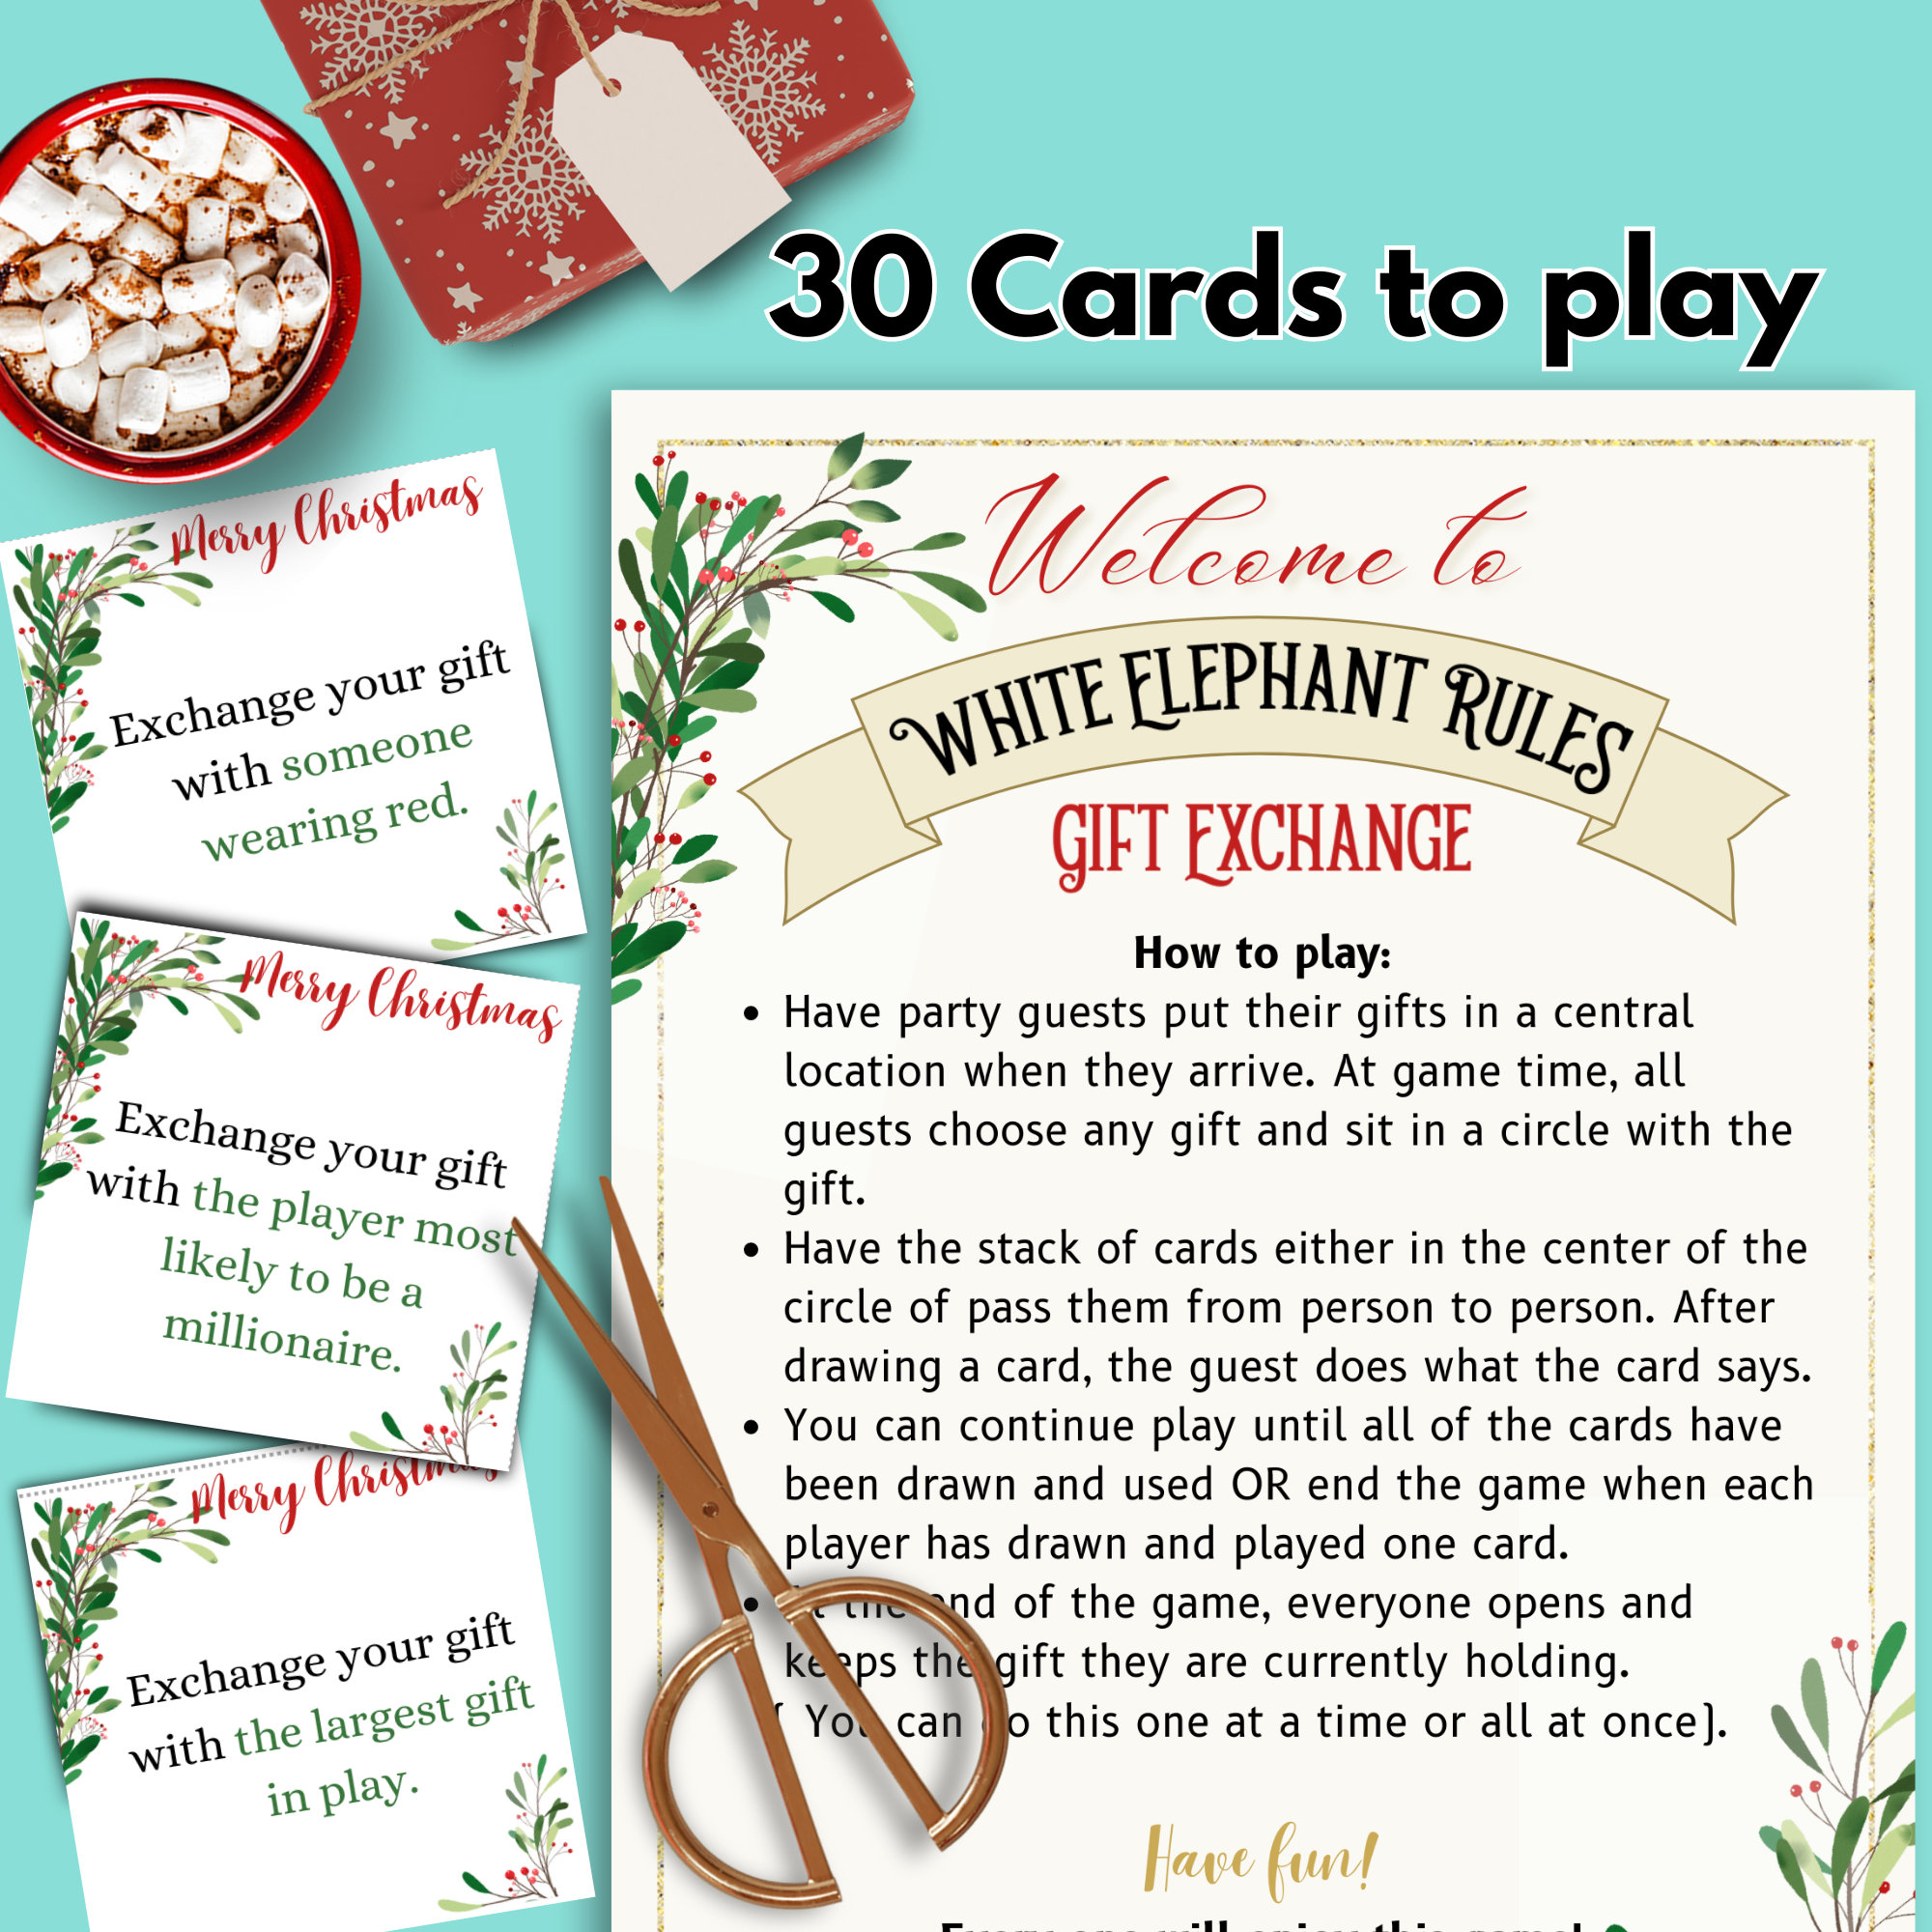 Prep In Your Step: Gift Guide: White Elephant/Dirty Santa